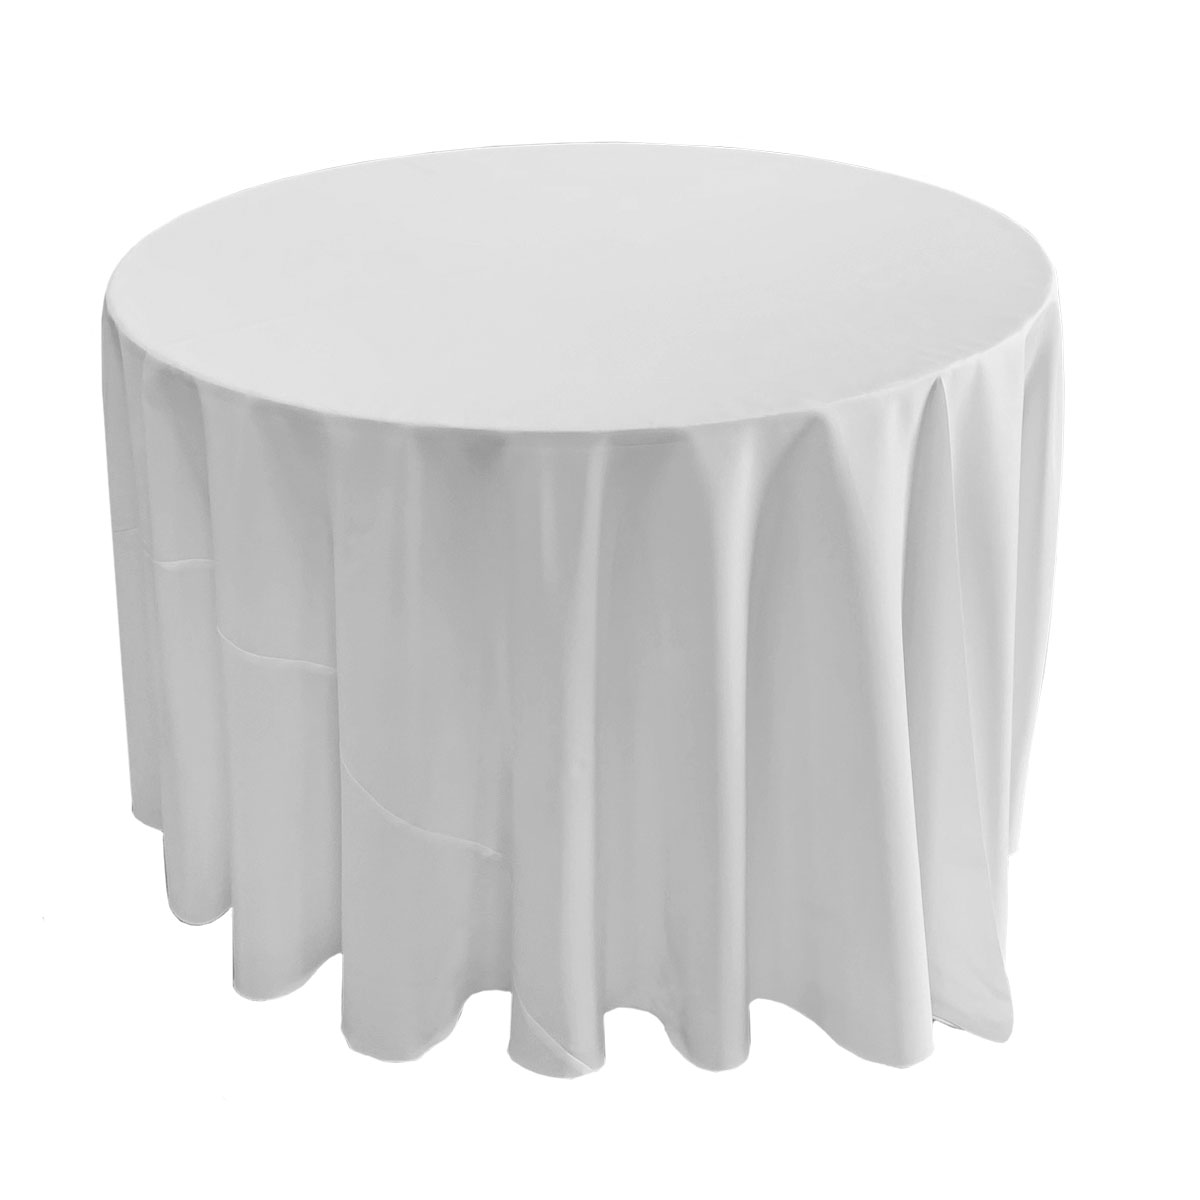 114" Round Solid White Tablecover On 48" Round Table With Locking Wheels 